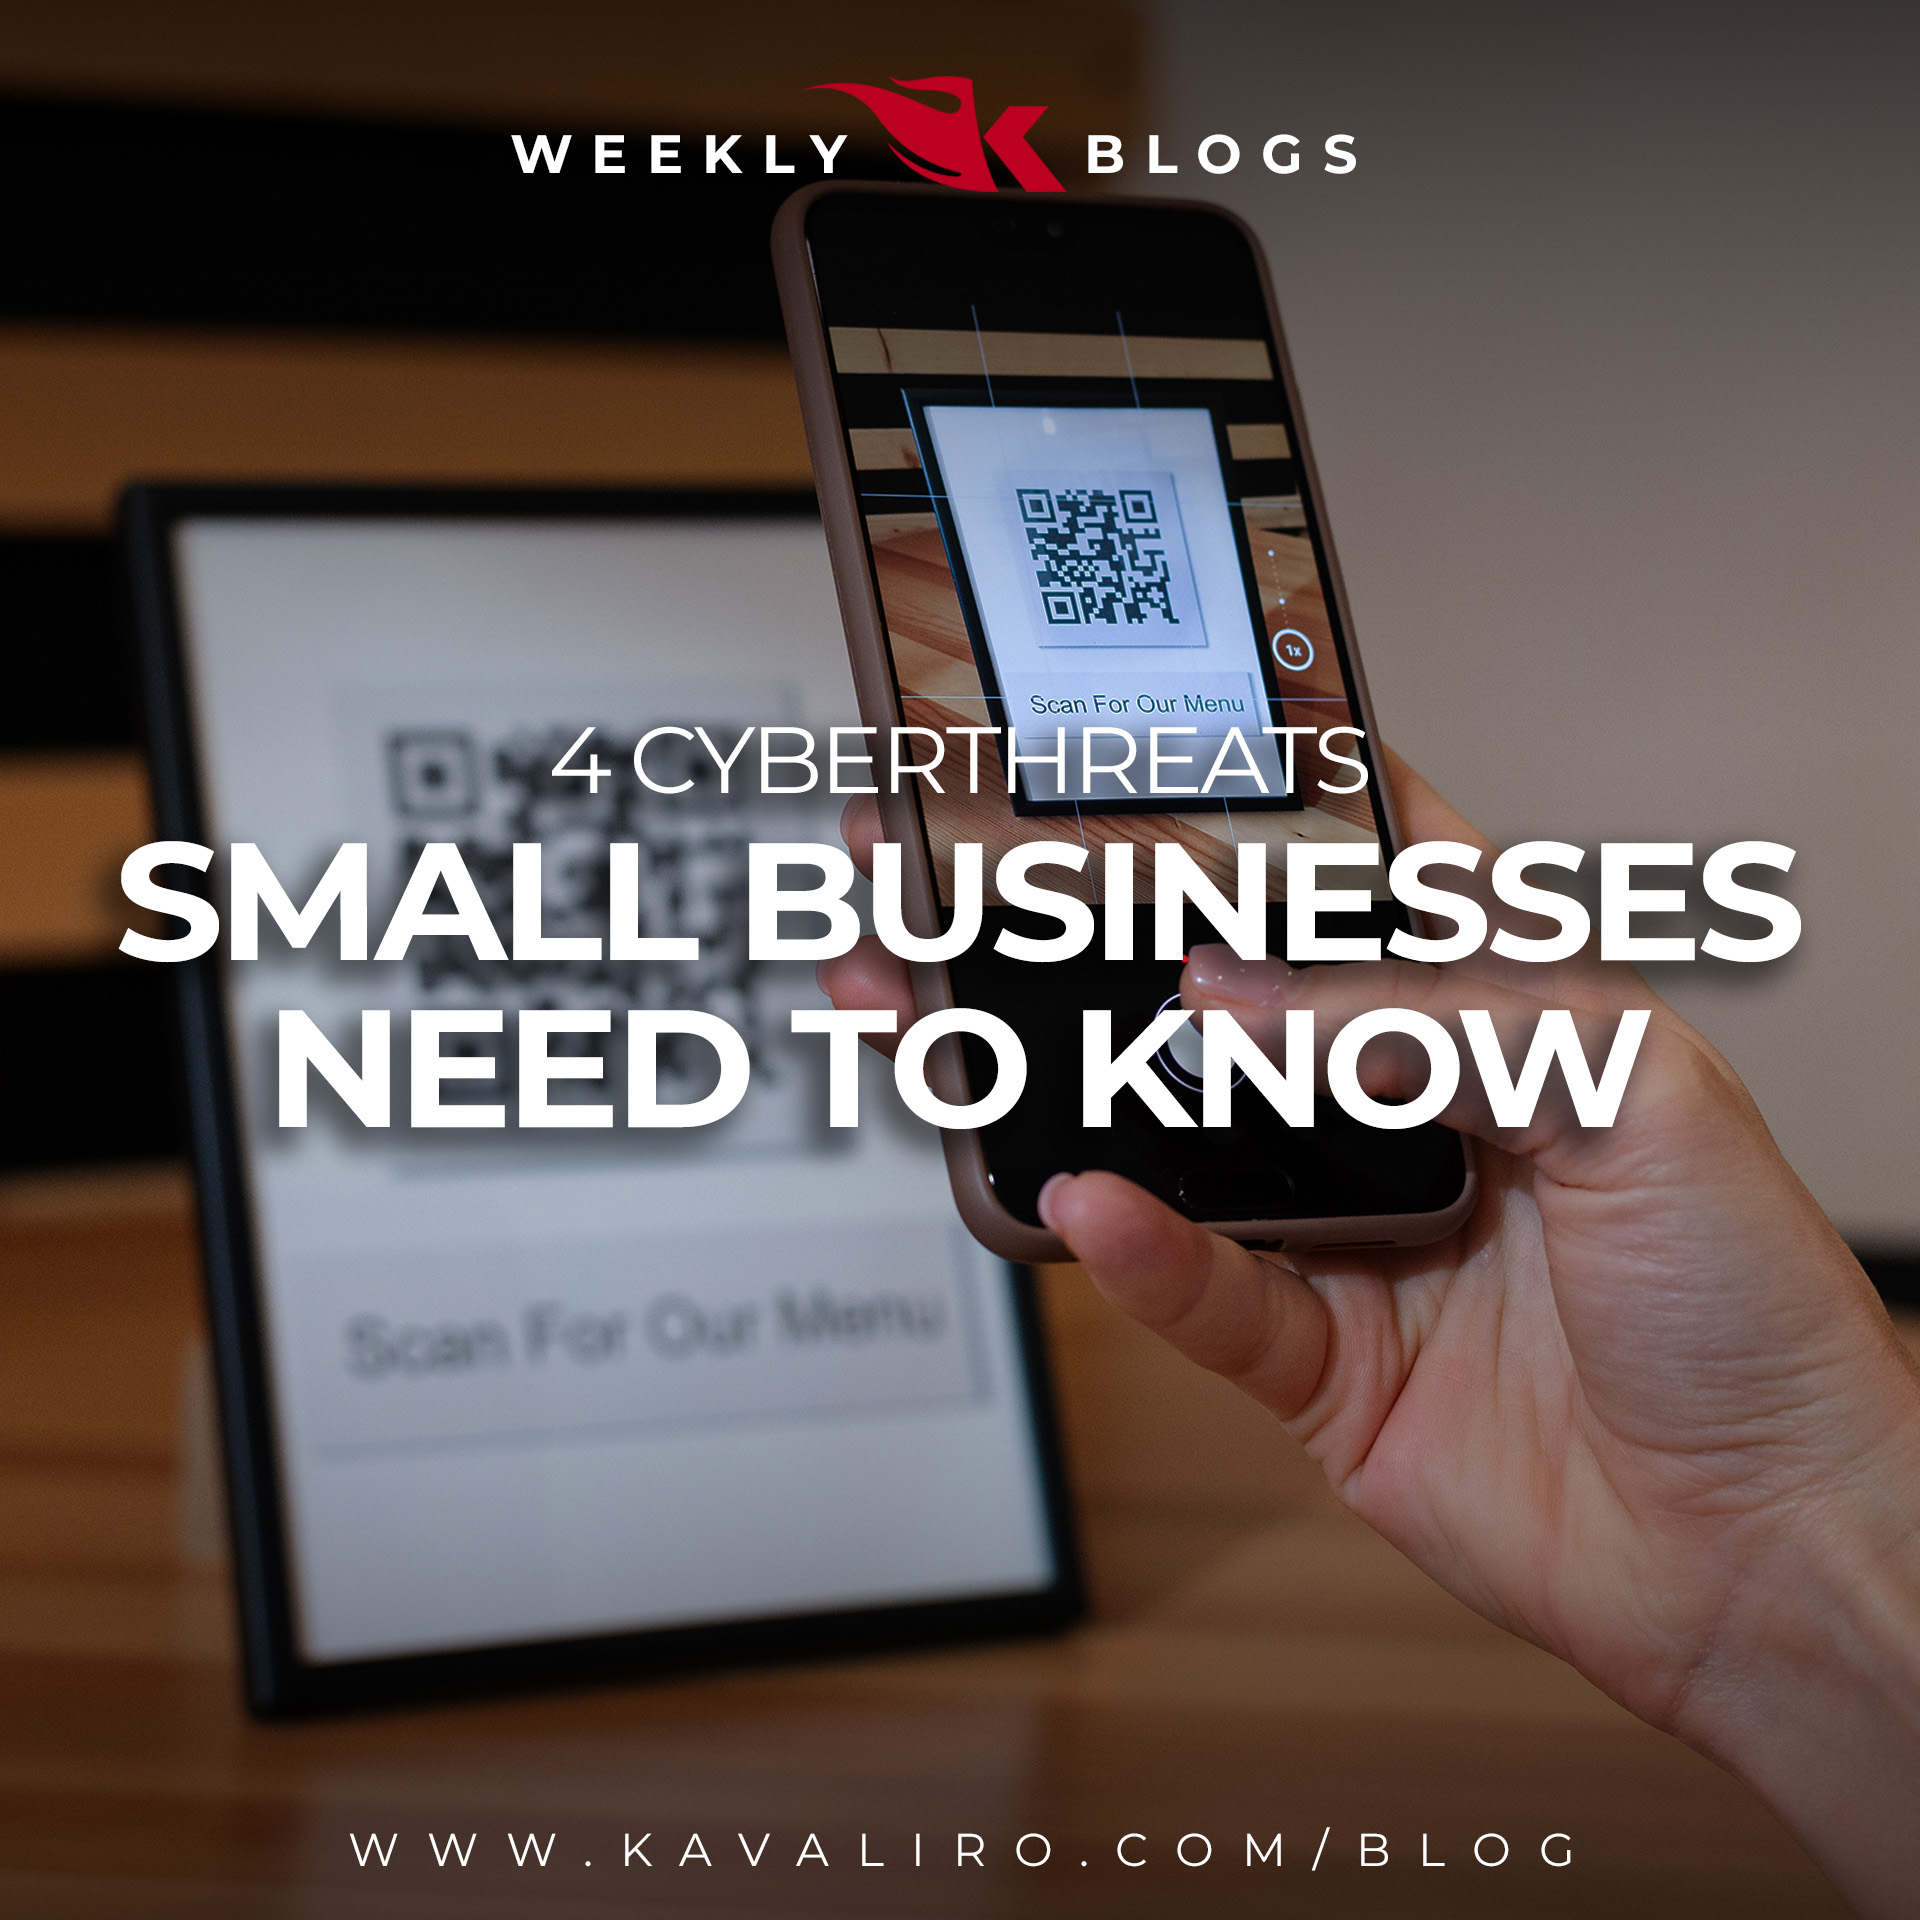 4 Cyberthreats Small Business Need to Know